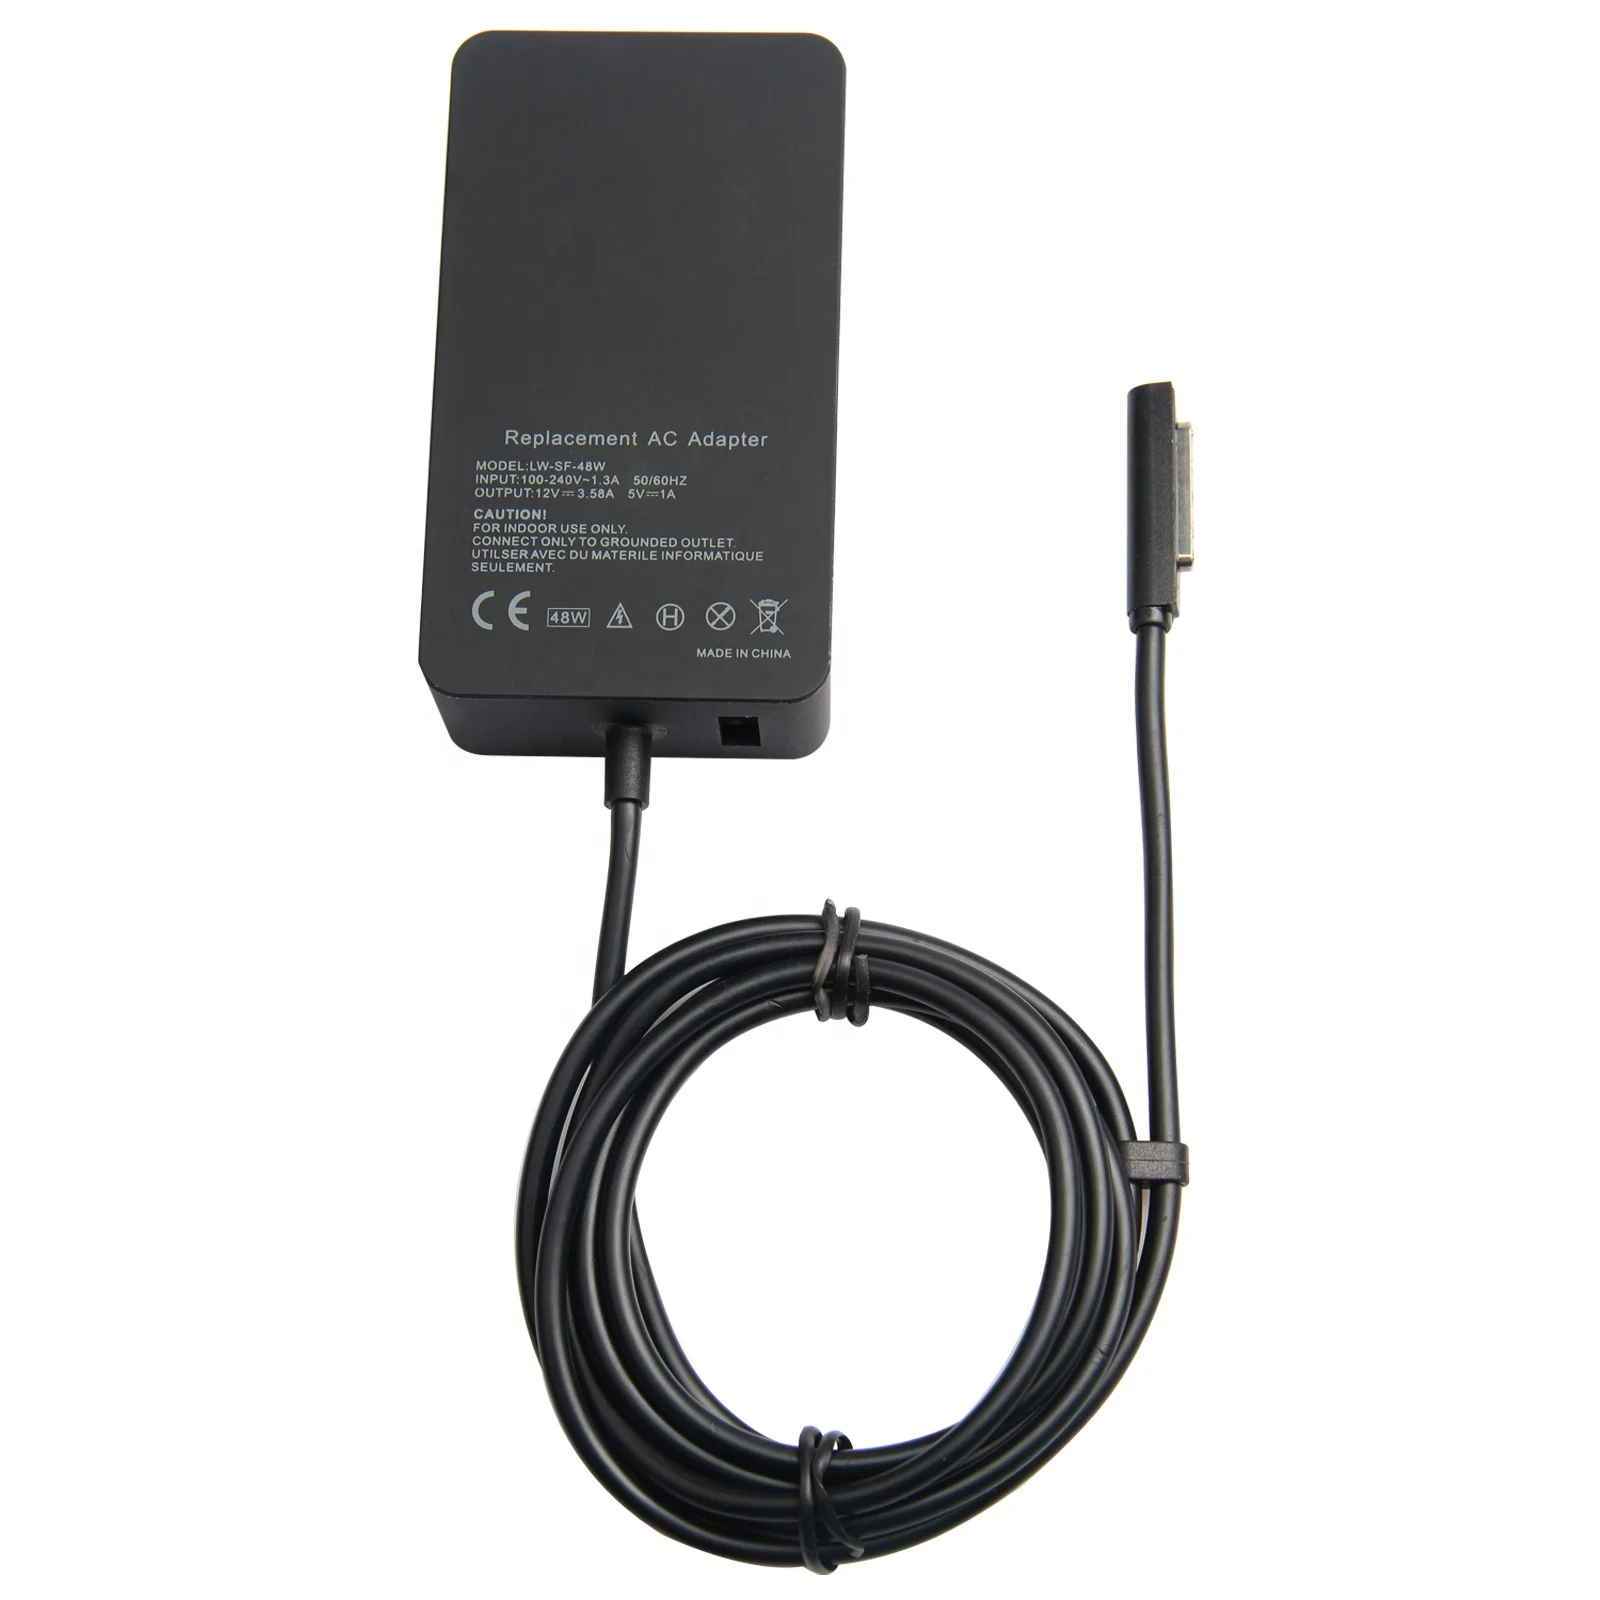 

Electronic Replacement Laptop Battery Charger AC Adapter 12V 3.58A 5V 1A 48w for Microsoft Surface Pro RT 2, Black